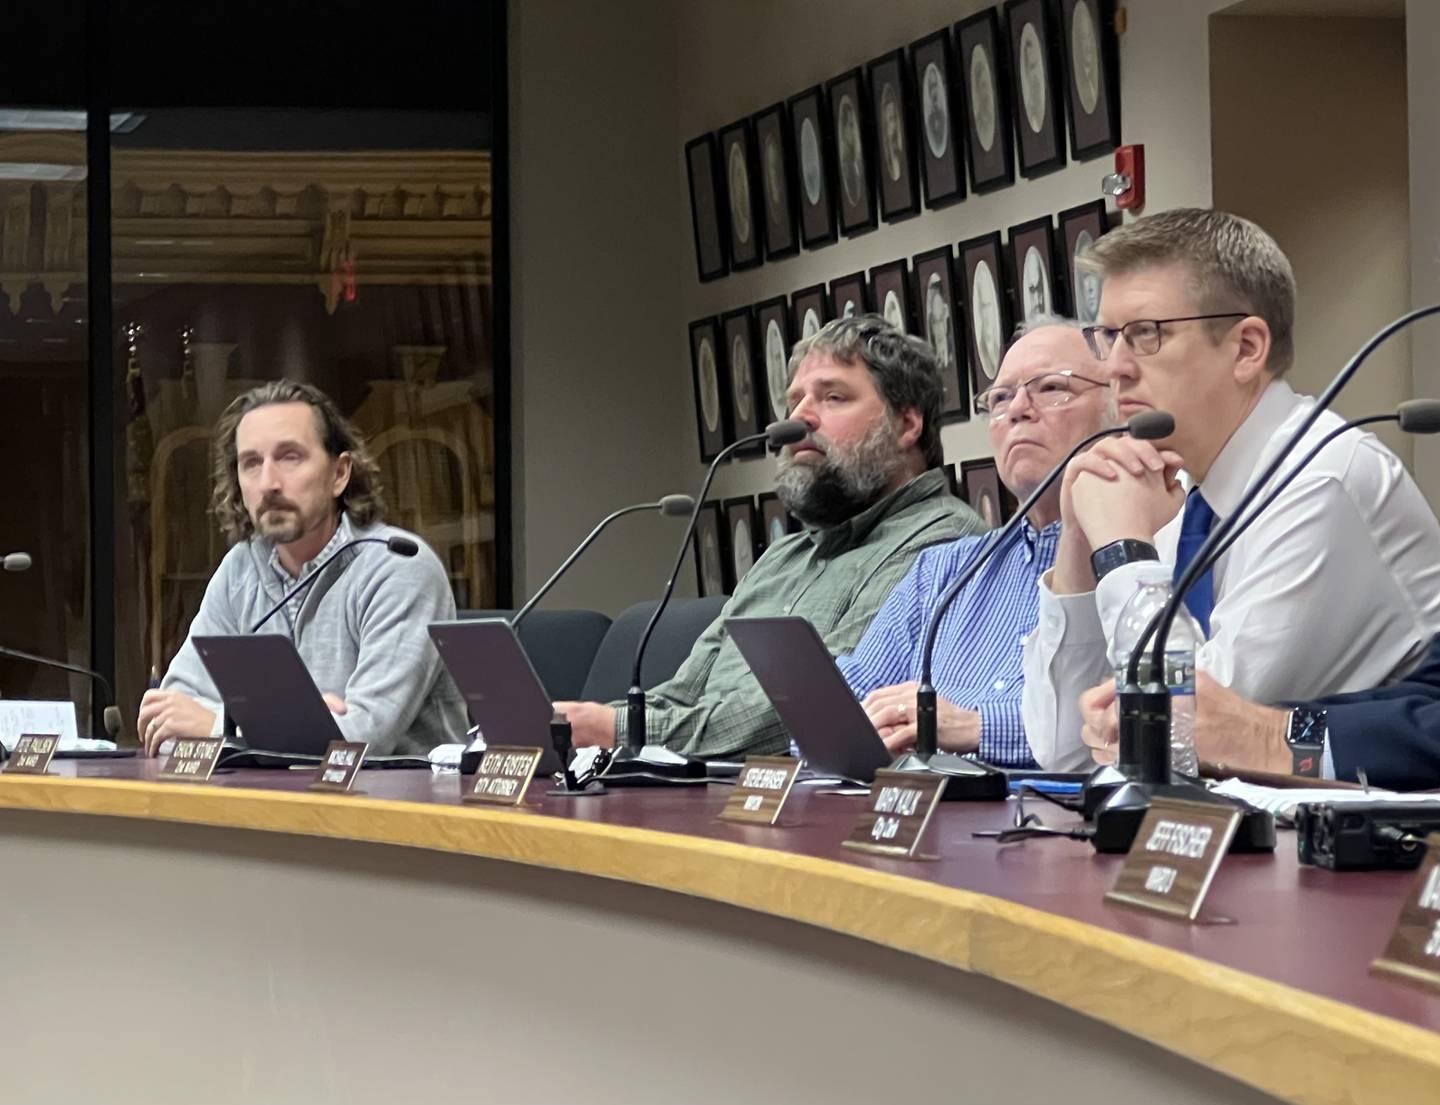 From left to right: First Ward Alderman Josh Huseman, Second Ward Alderman Pete Paulsen, Second Ward Alderman Chuck Stowe and Sycamore City Managaer Michael Hall list during the public comment period of the Dec. 19 Sycamore City Council meeting.